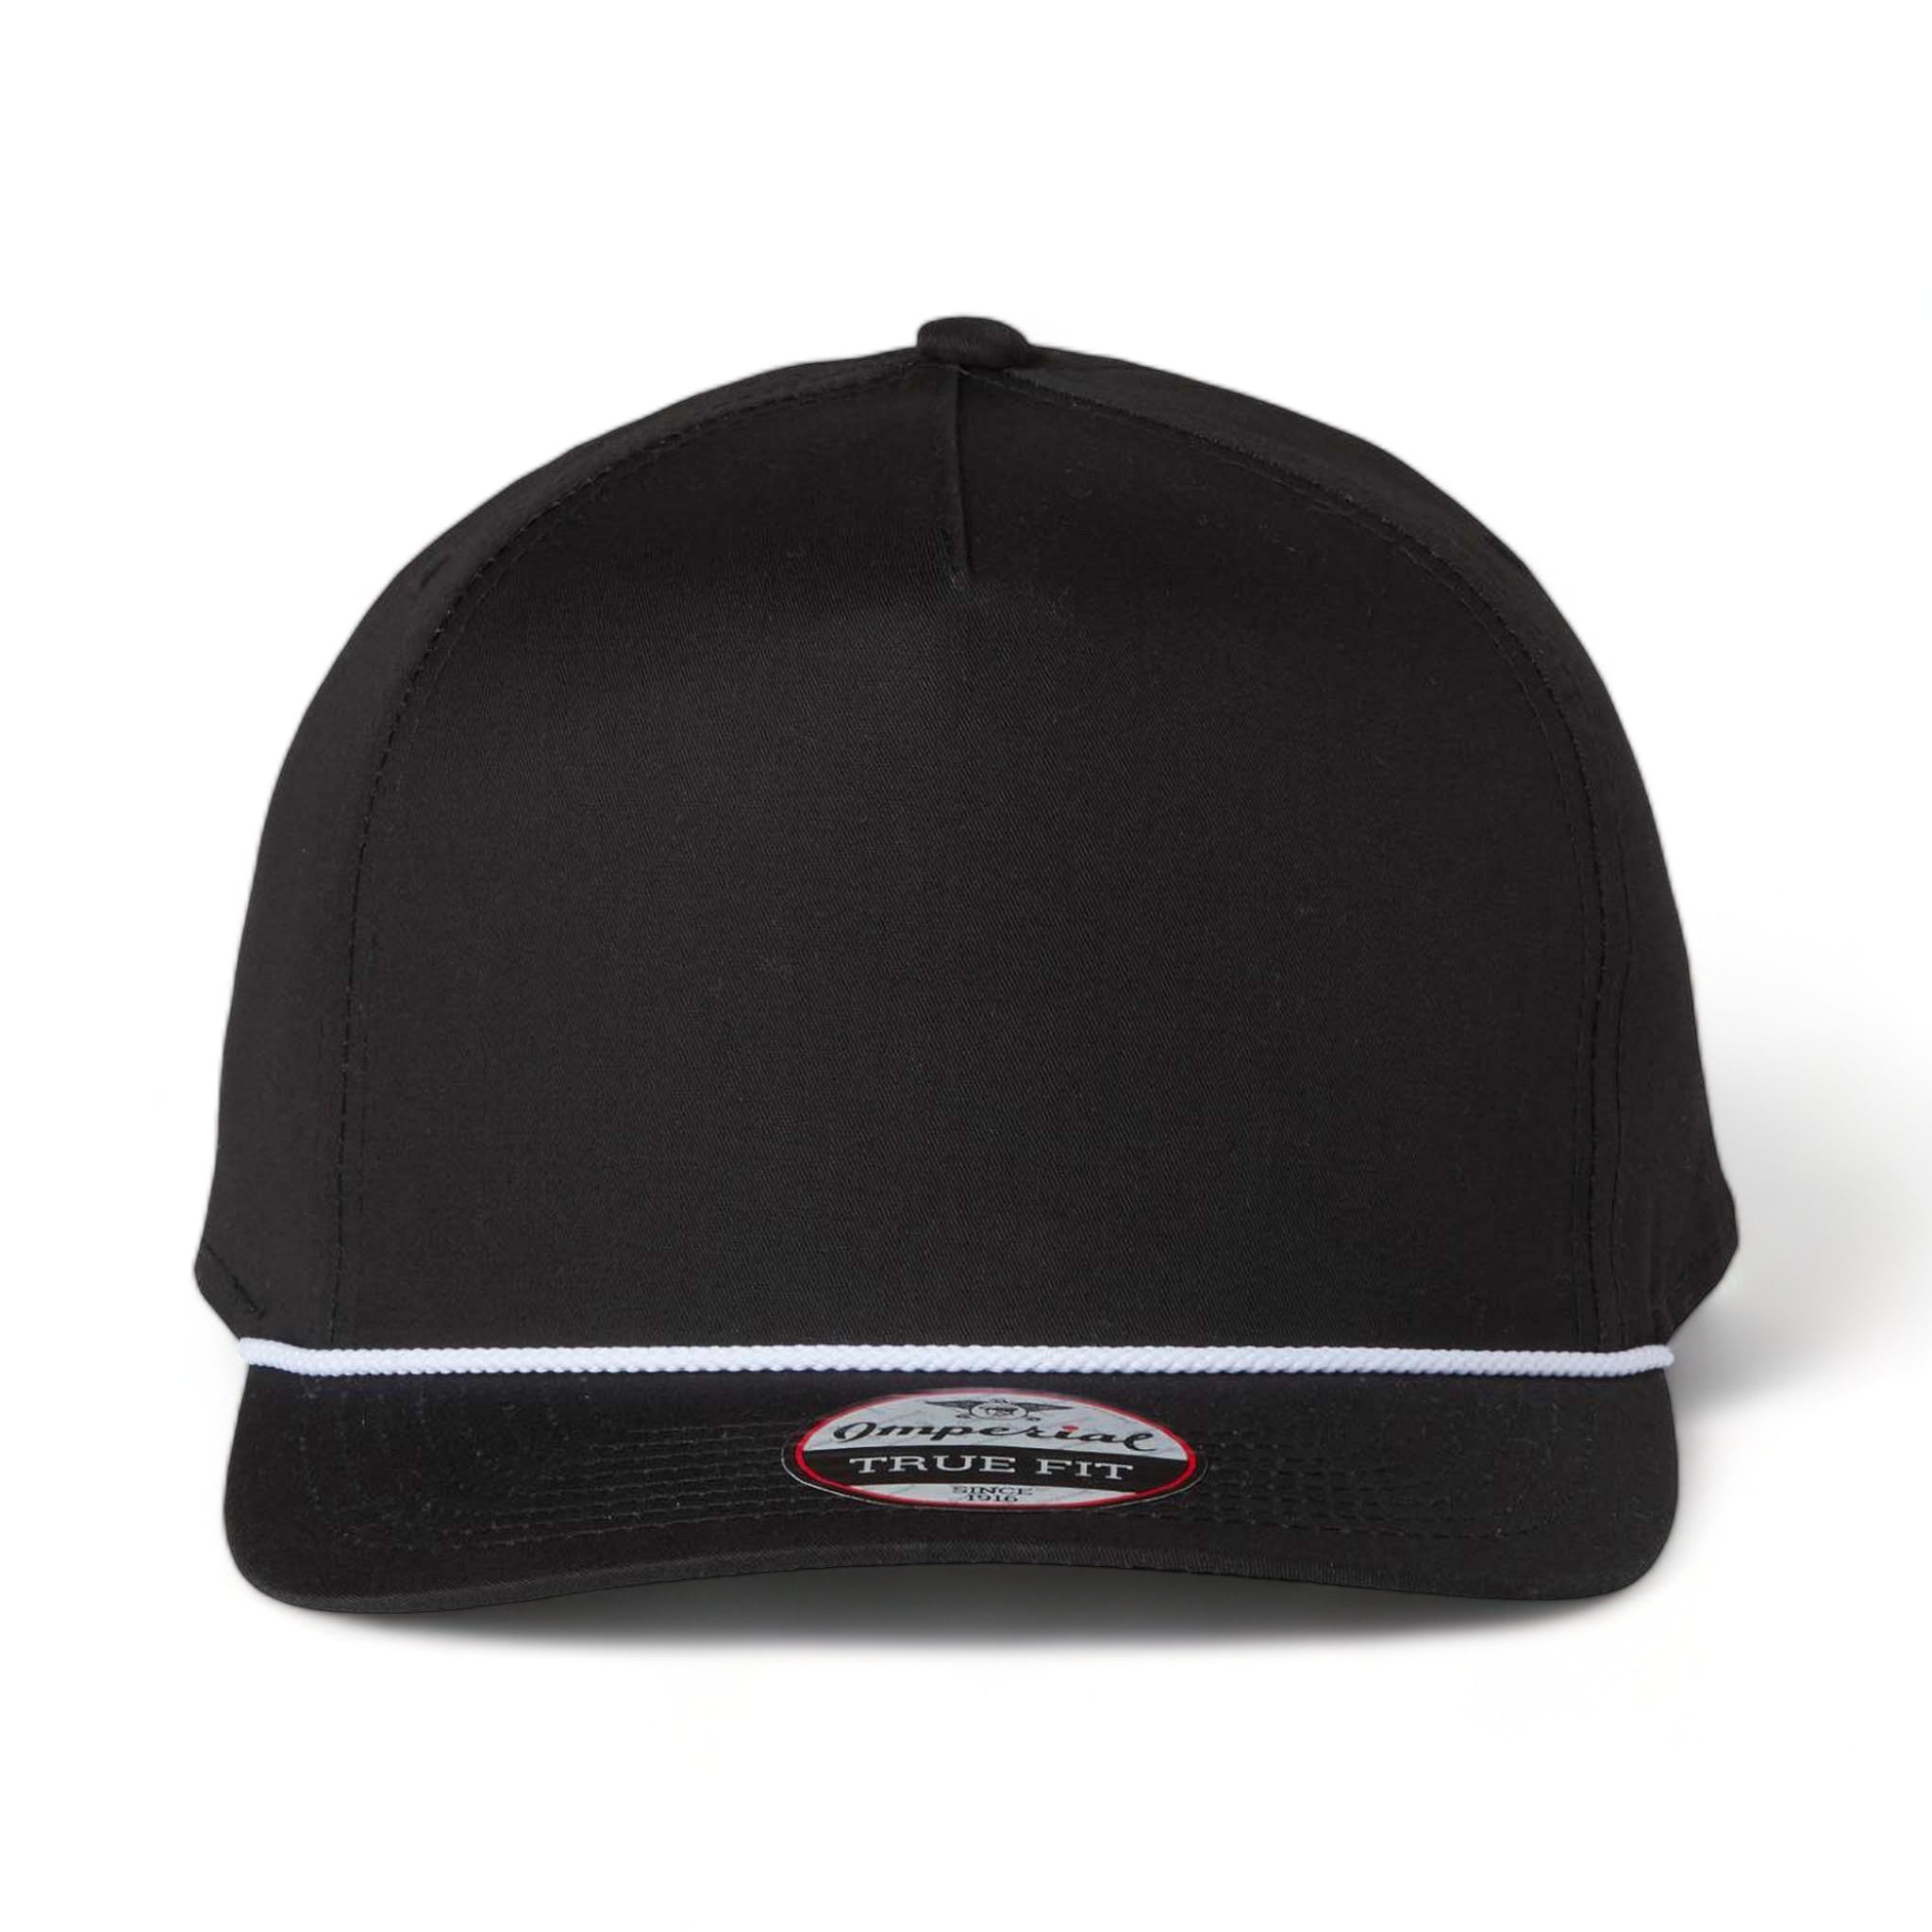 Front view of Imperial 5056 custom hat in black and white